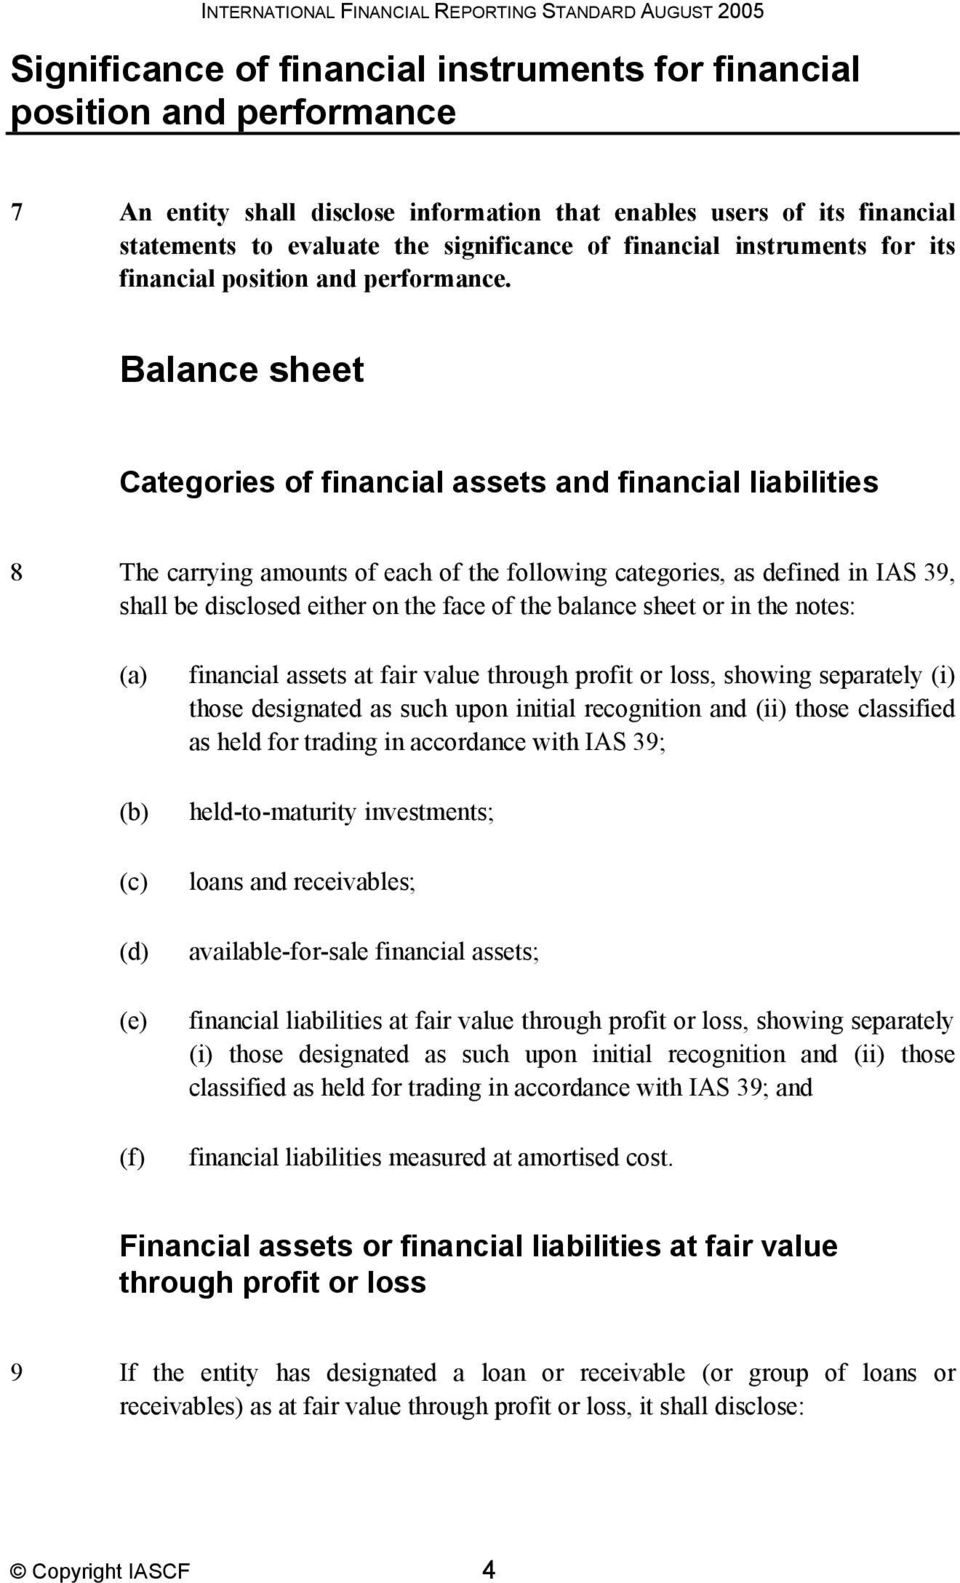 Balance sheet Categories of financial assets and financial liabilities 8 The carrying amounts of each of the following categories, as defined in IAS 39, shall be disclosed either on the face of the